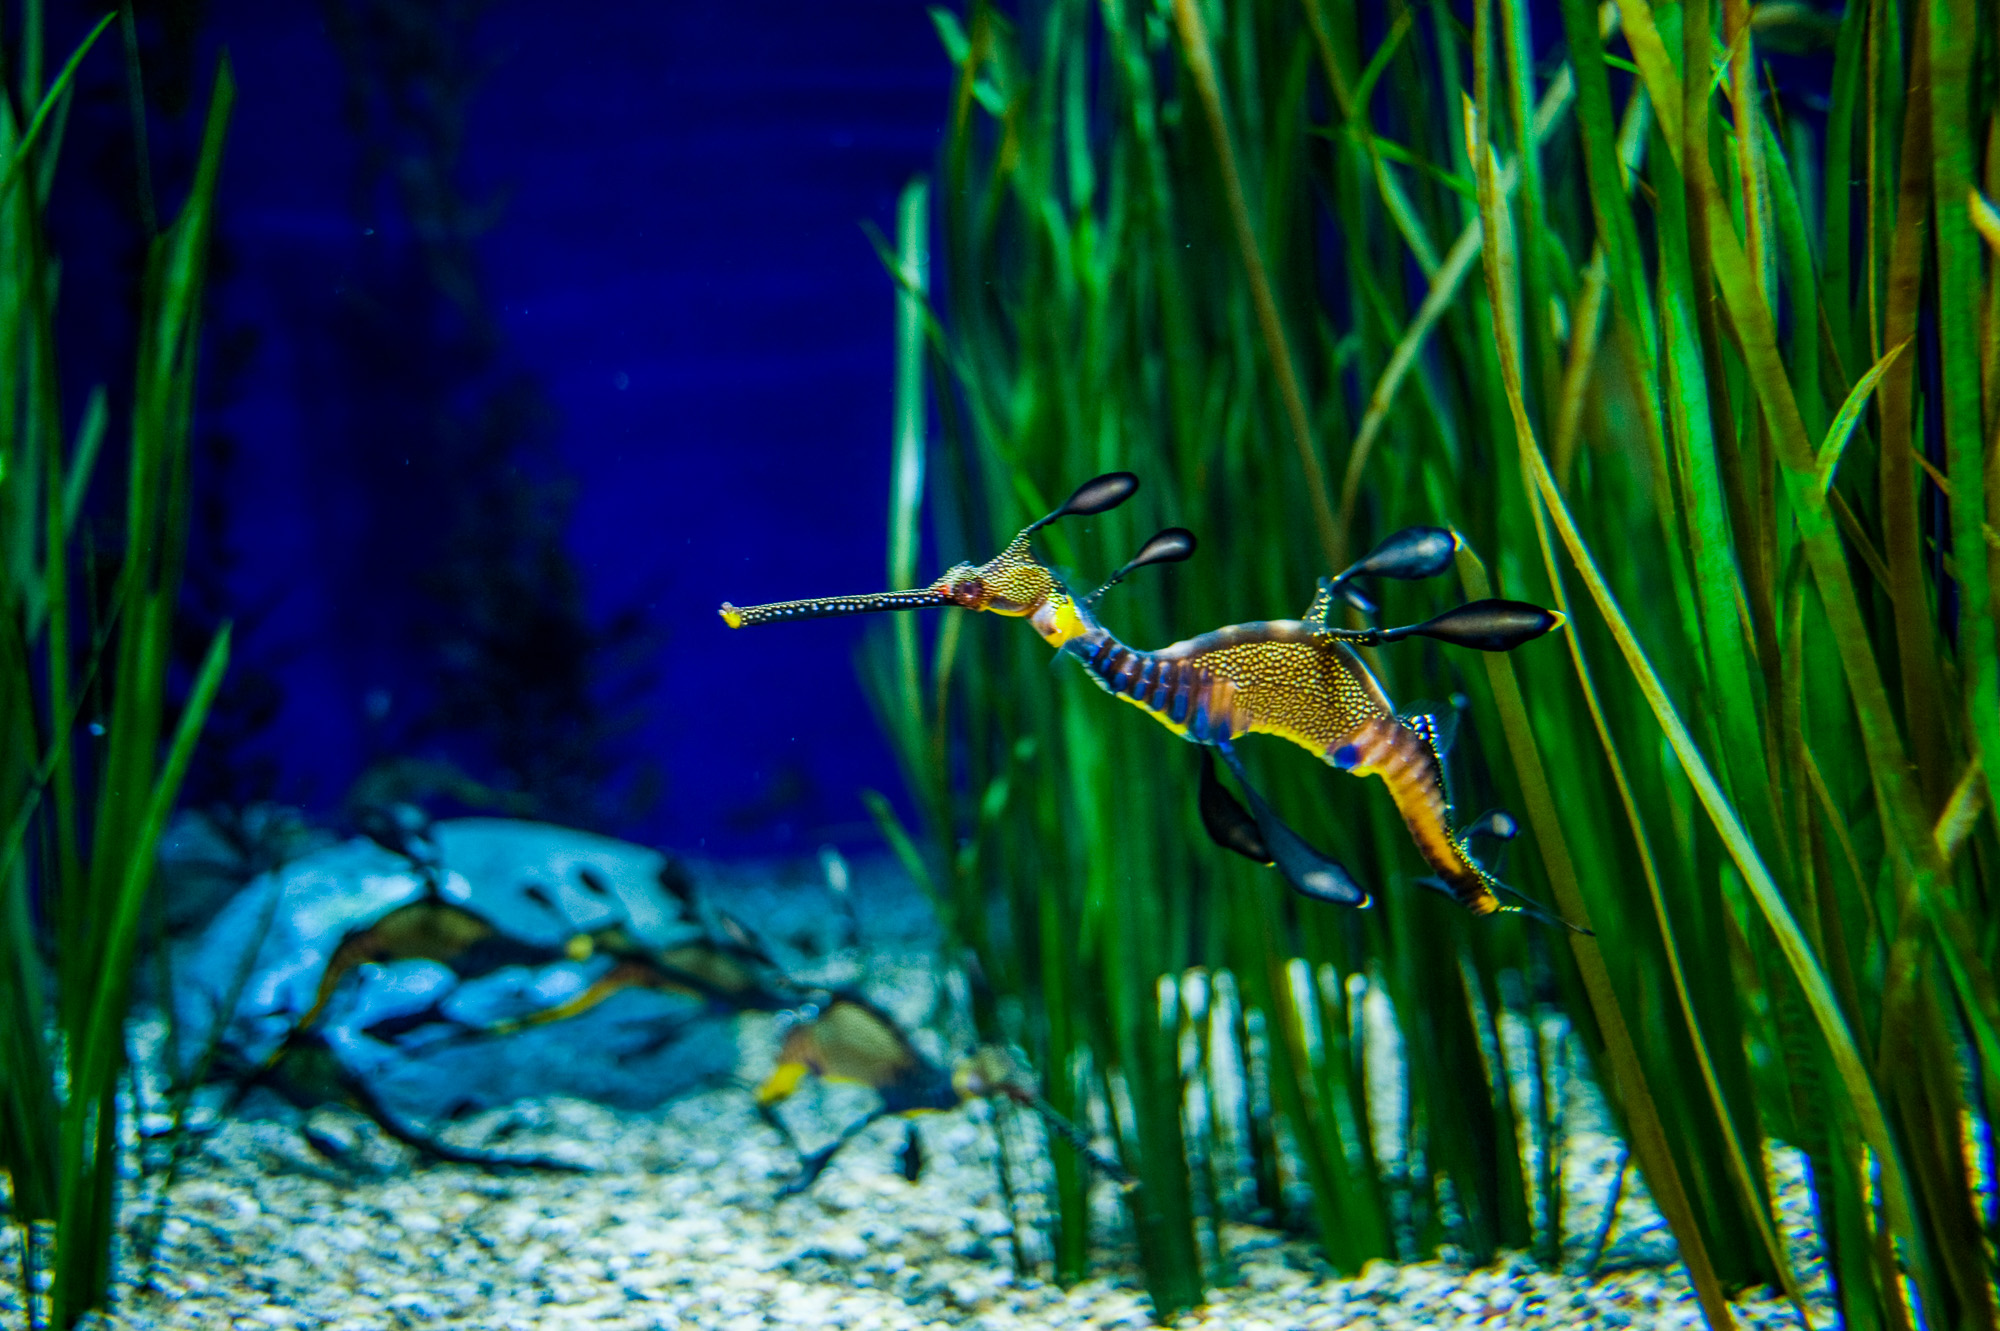 Monterey Bay Aquarium 886, Cannery Road. Hyppocampes "Dragon Fly"